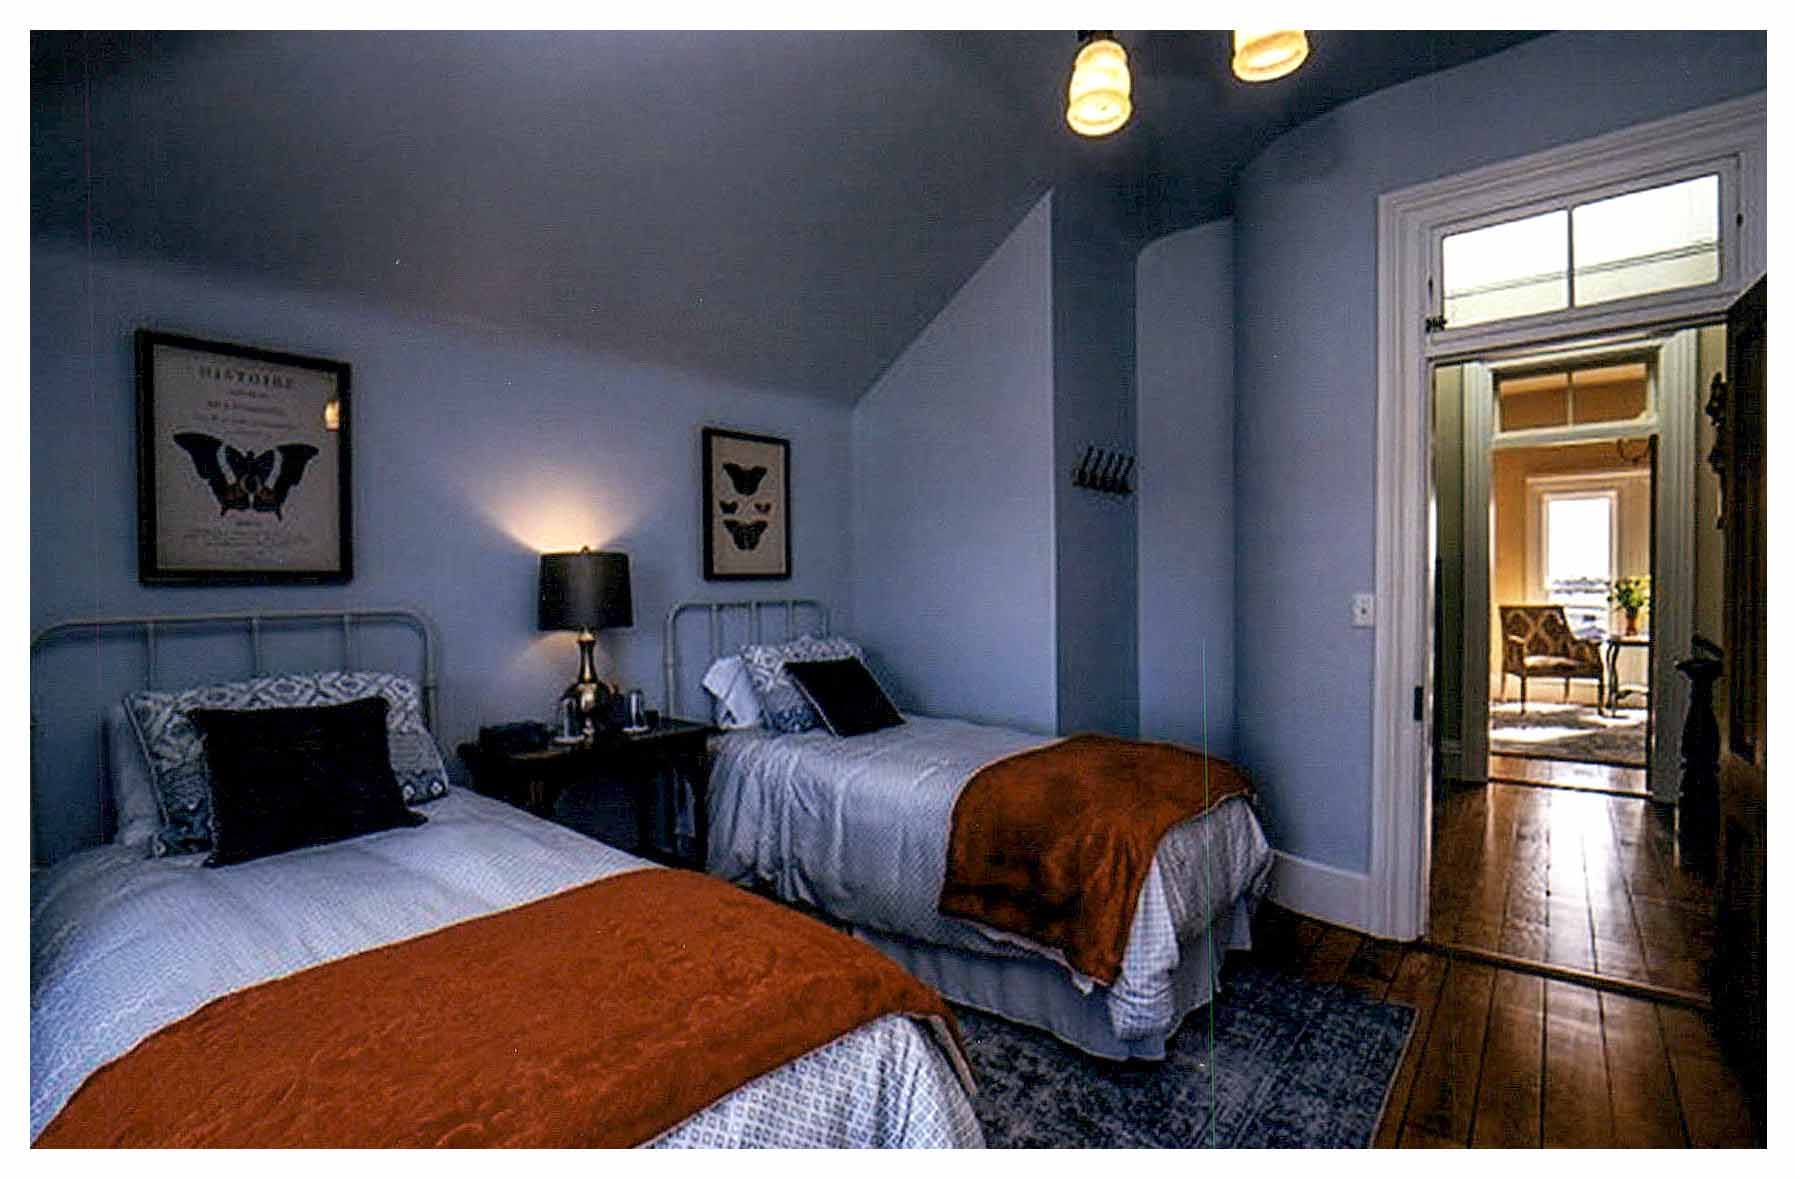 After: second floor bedroom facing door with transom to hallway and other side of the rounded corner. Light blue walls and sloped ceiling compliment white painted trim and refinished wood floor.